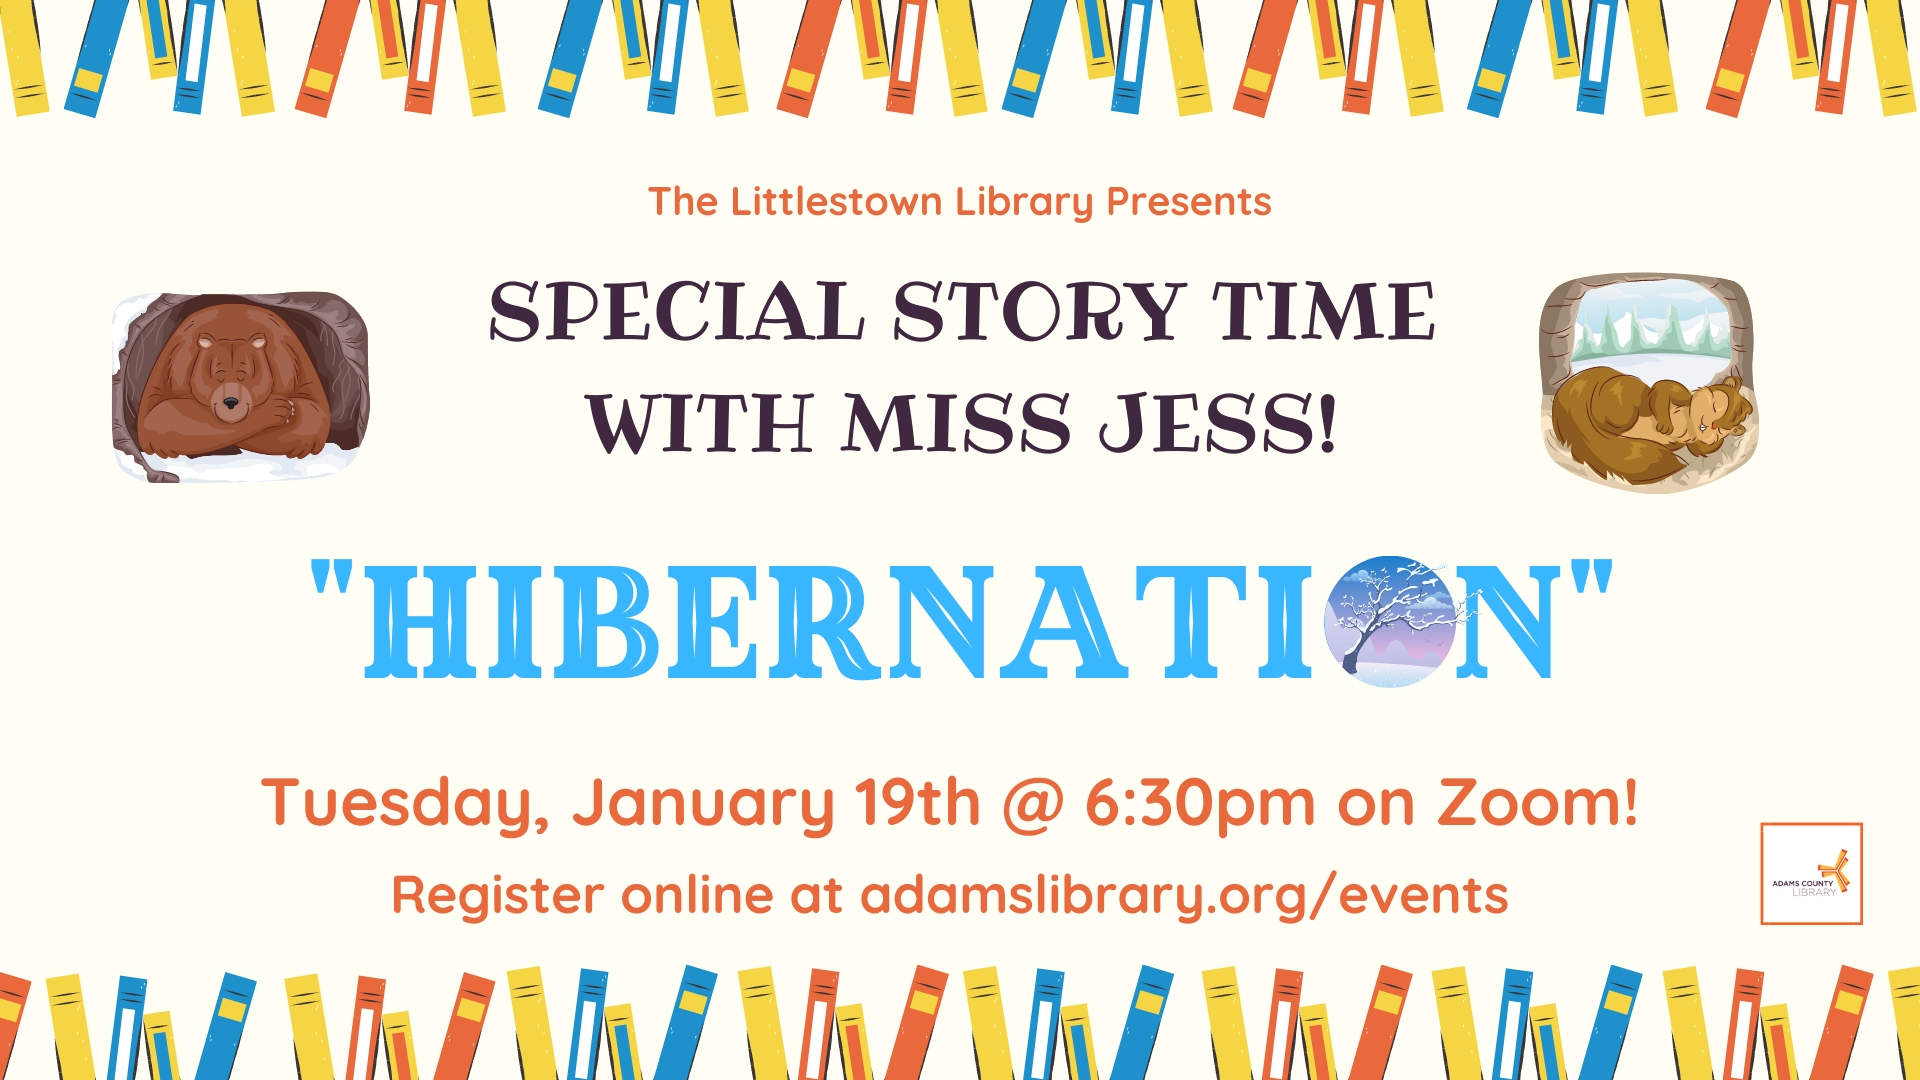 Special Story Time with Miss Jess on Hibernation. Join us Thursday, January 19th at 6:30pm on Zoom. Register online at adamslibrary.org/events